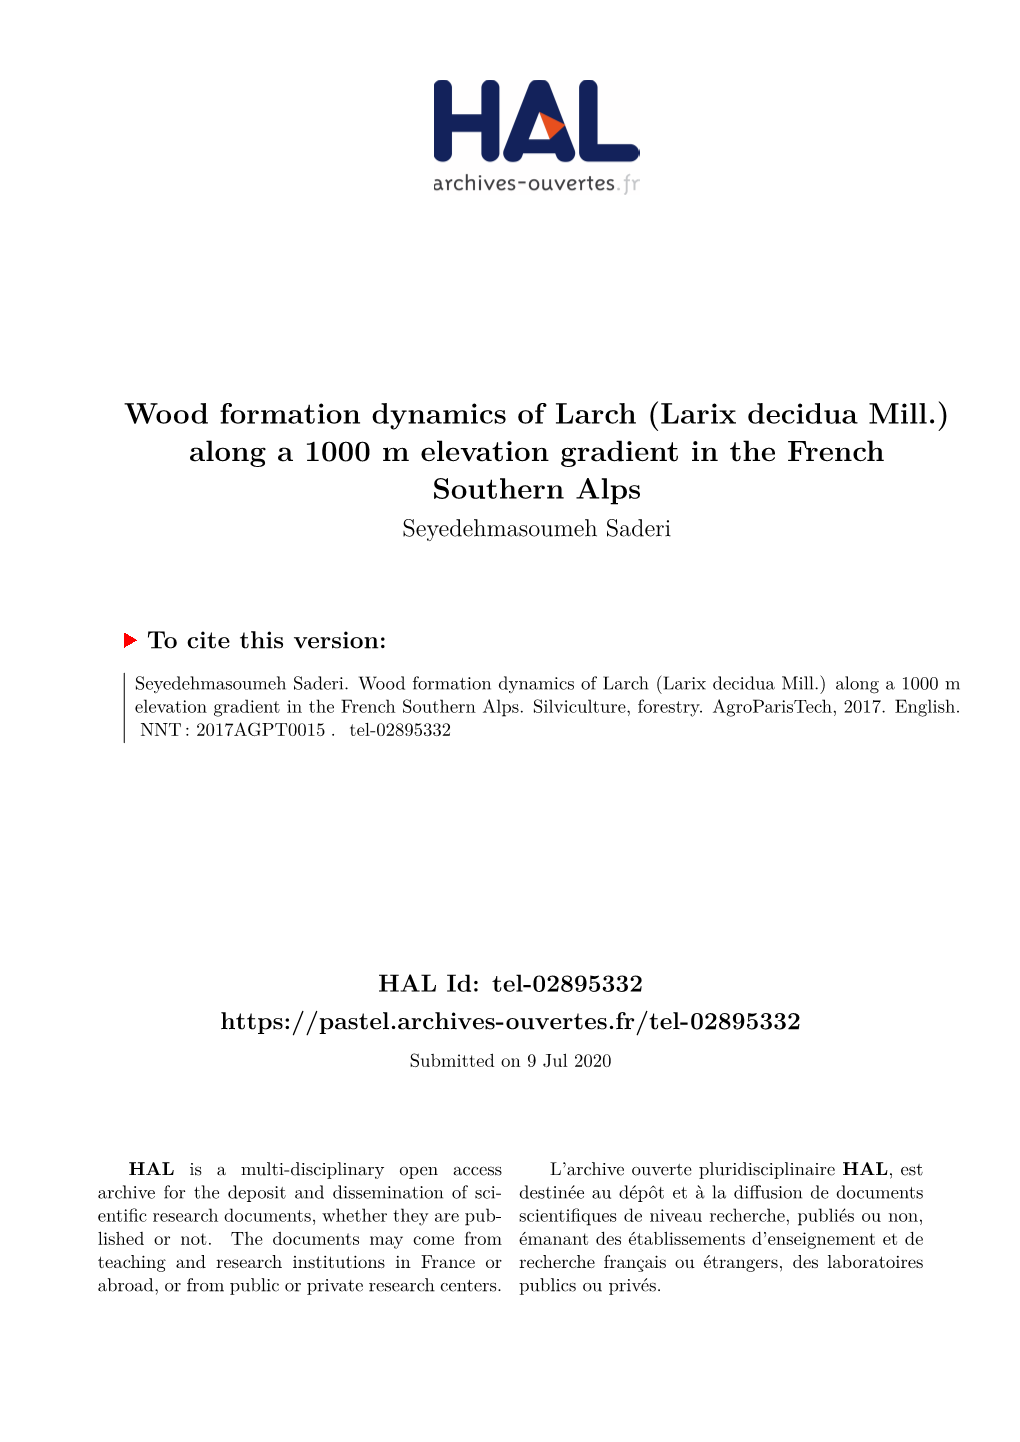 Wood Formation Dynamics of Larch (Larix Decidua Mill.) Along a 1000 M Elevation Gradient in the French Southern Alps Seyedehmasoumeh Saderi